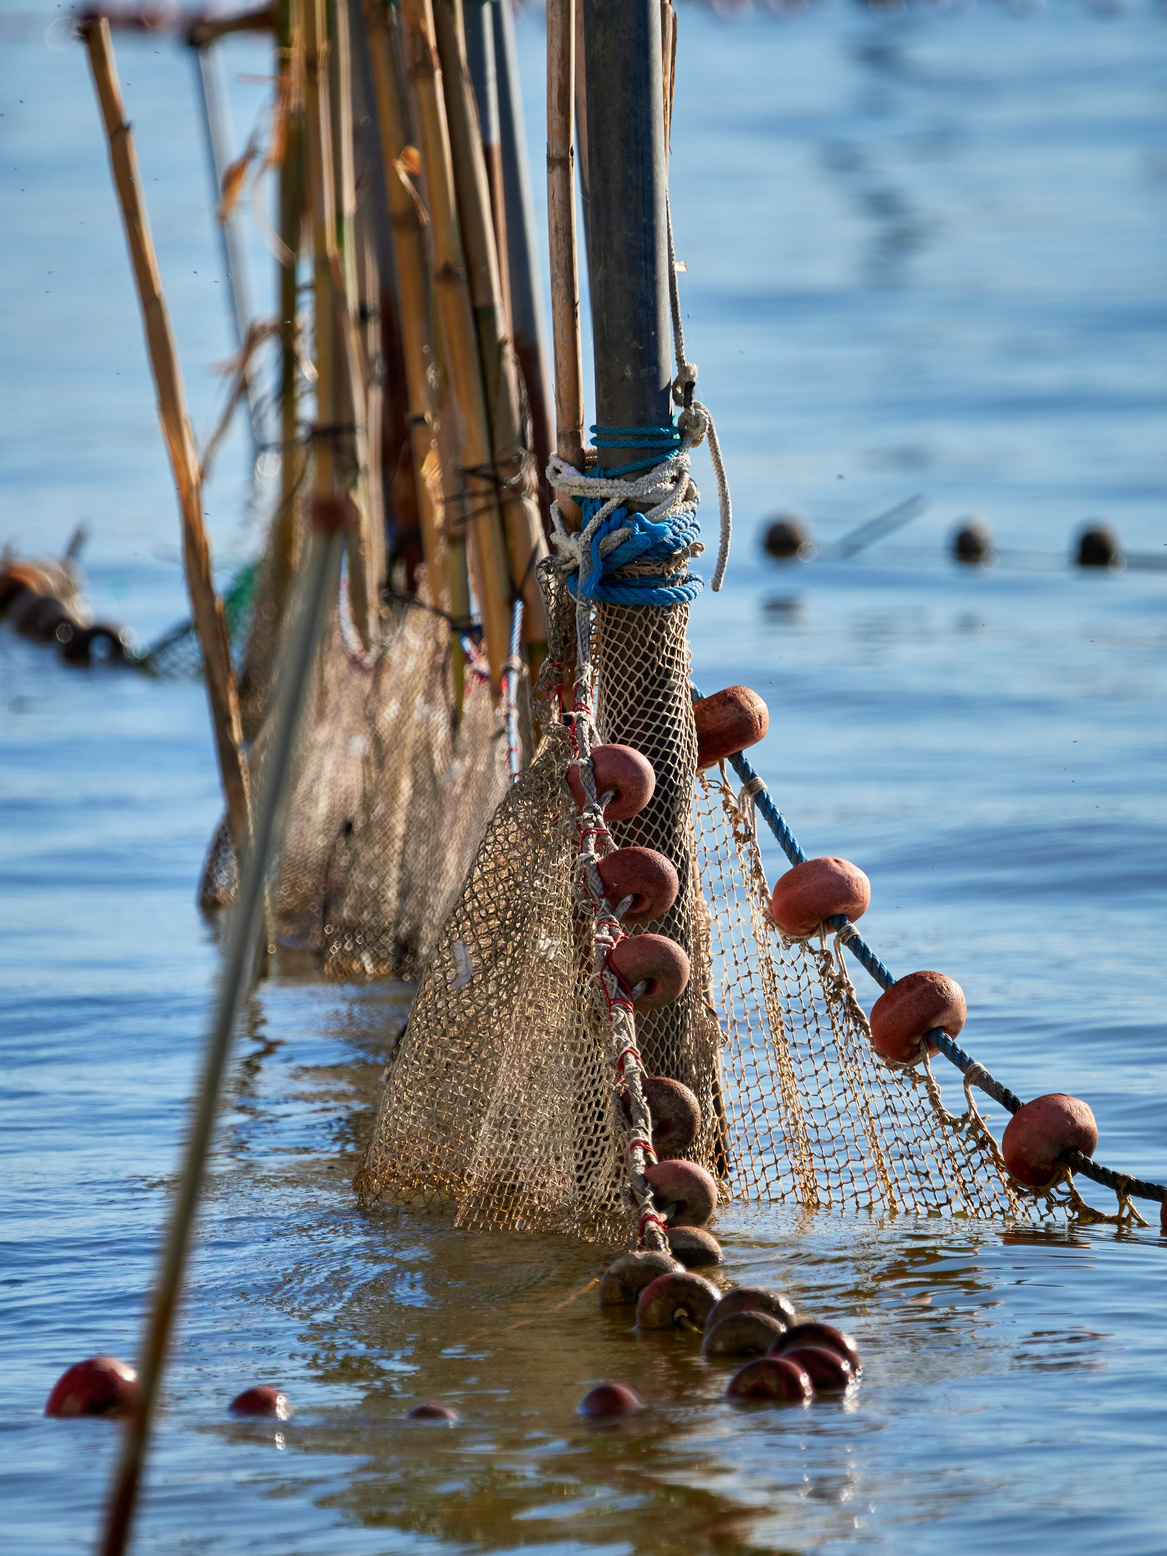 The gears and gear used in the traditional fishing of L'Albufera, Valencia